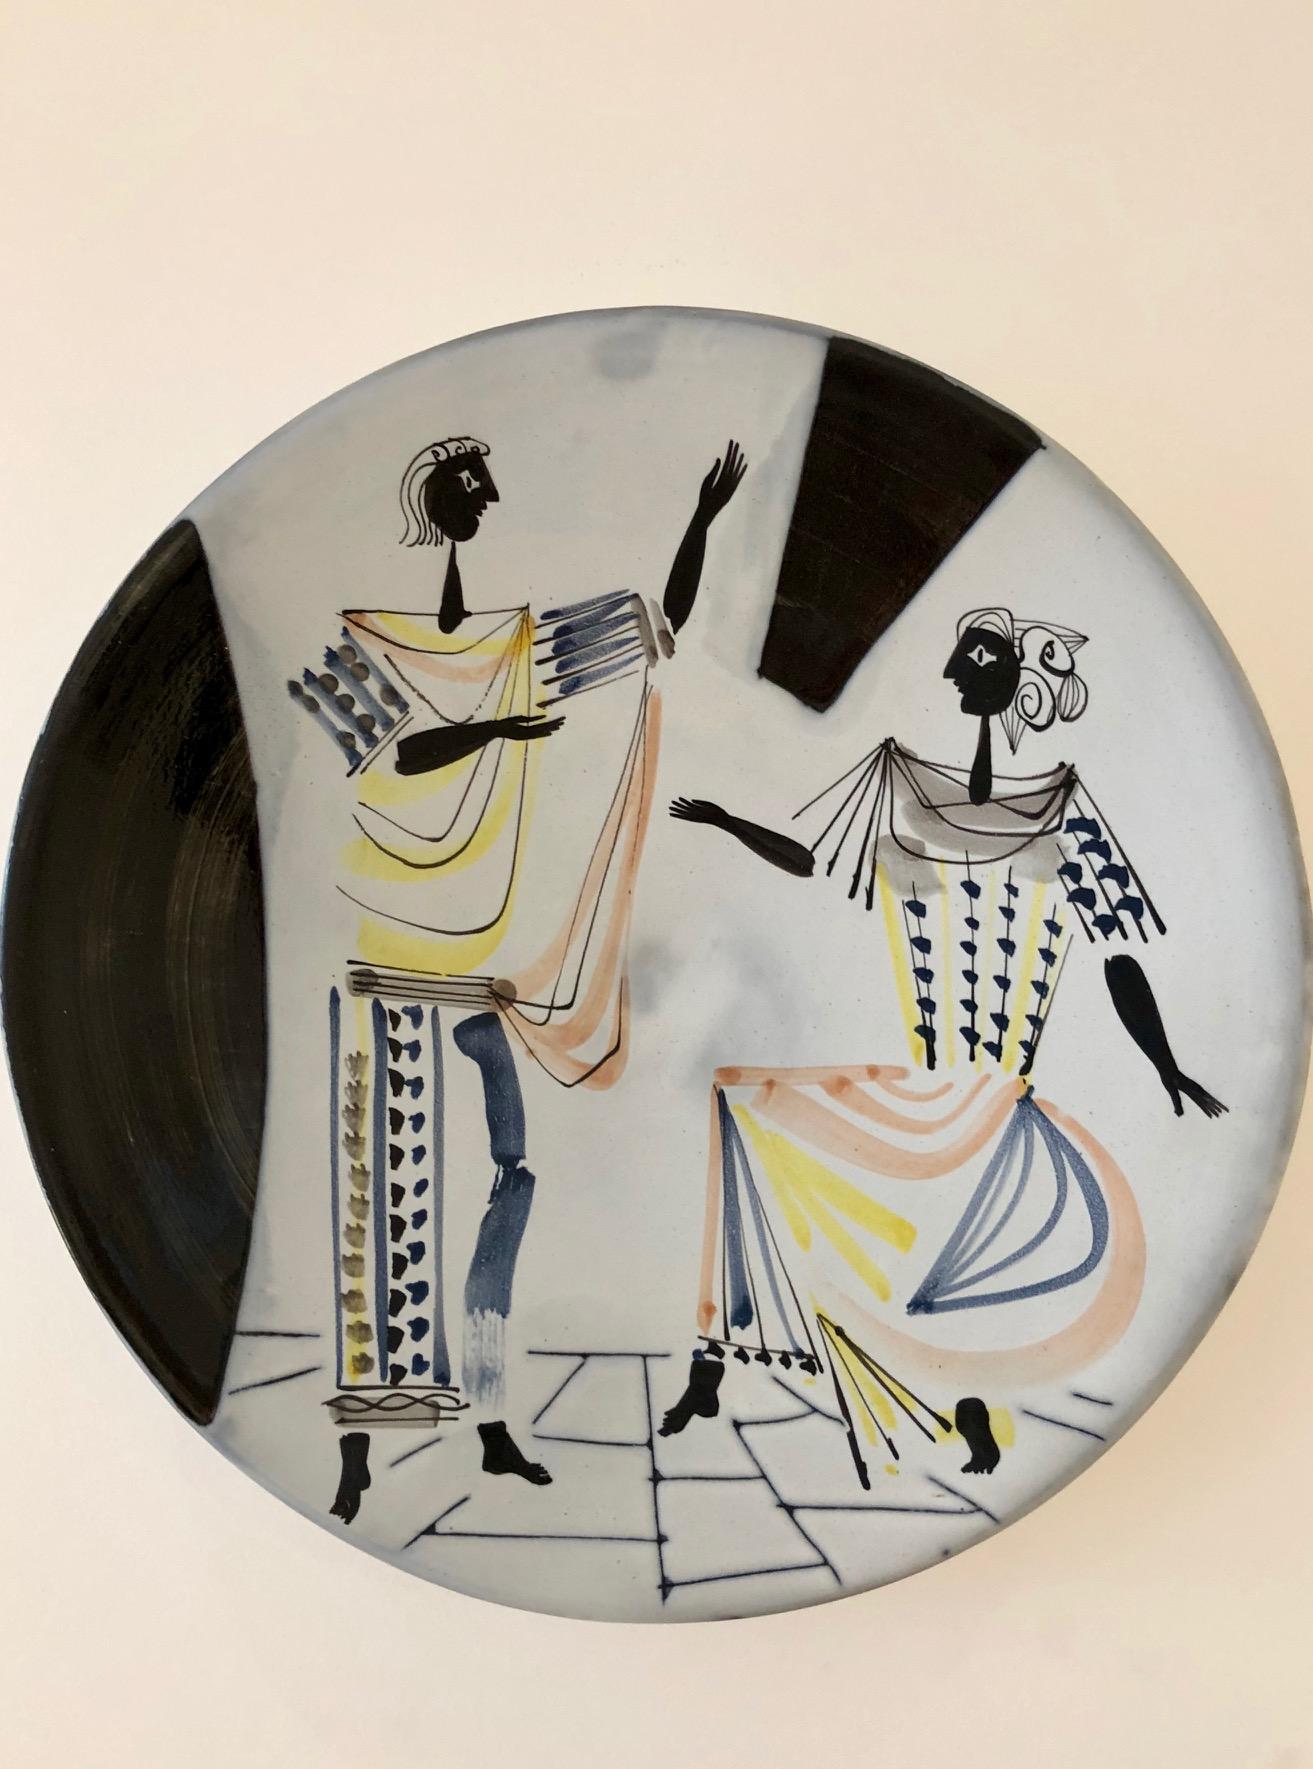 Roger Capron (1922-2006)
Large plate, faience tin glaze, paraffin reserve and polychrome decoration with ancient figures, 1955
Measures: Diameter 39 cm. Signed Capron Vallauris.